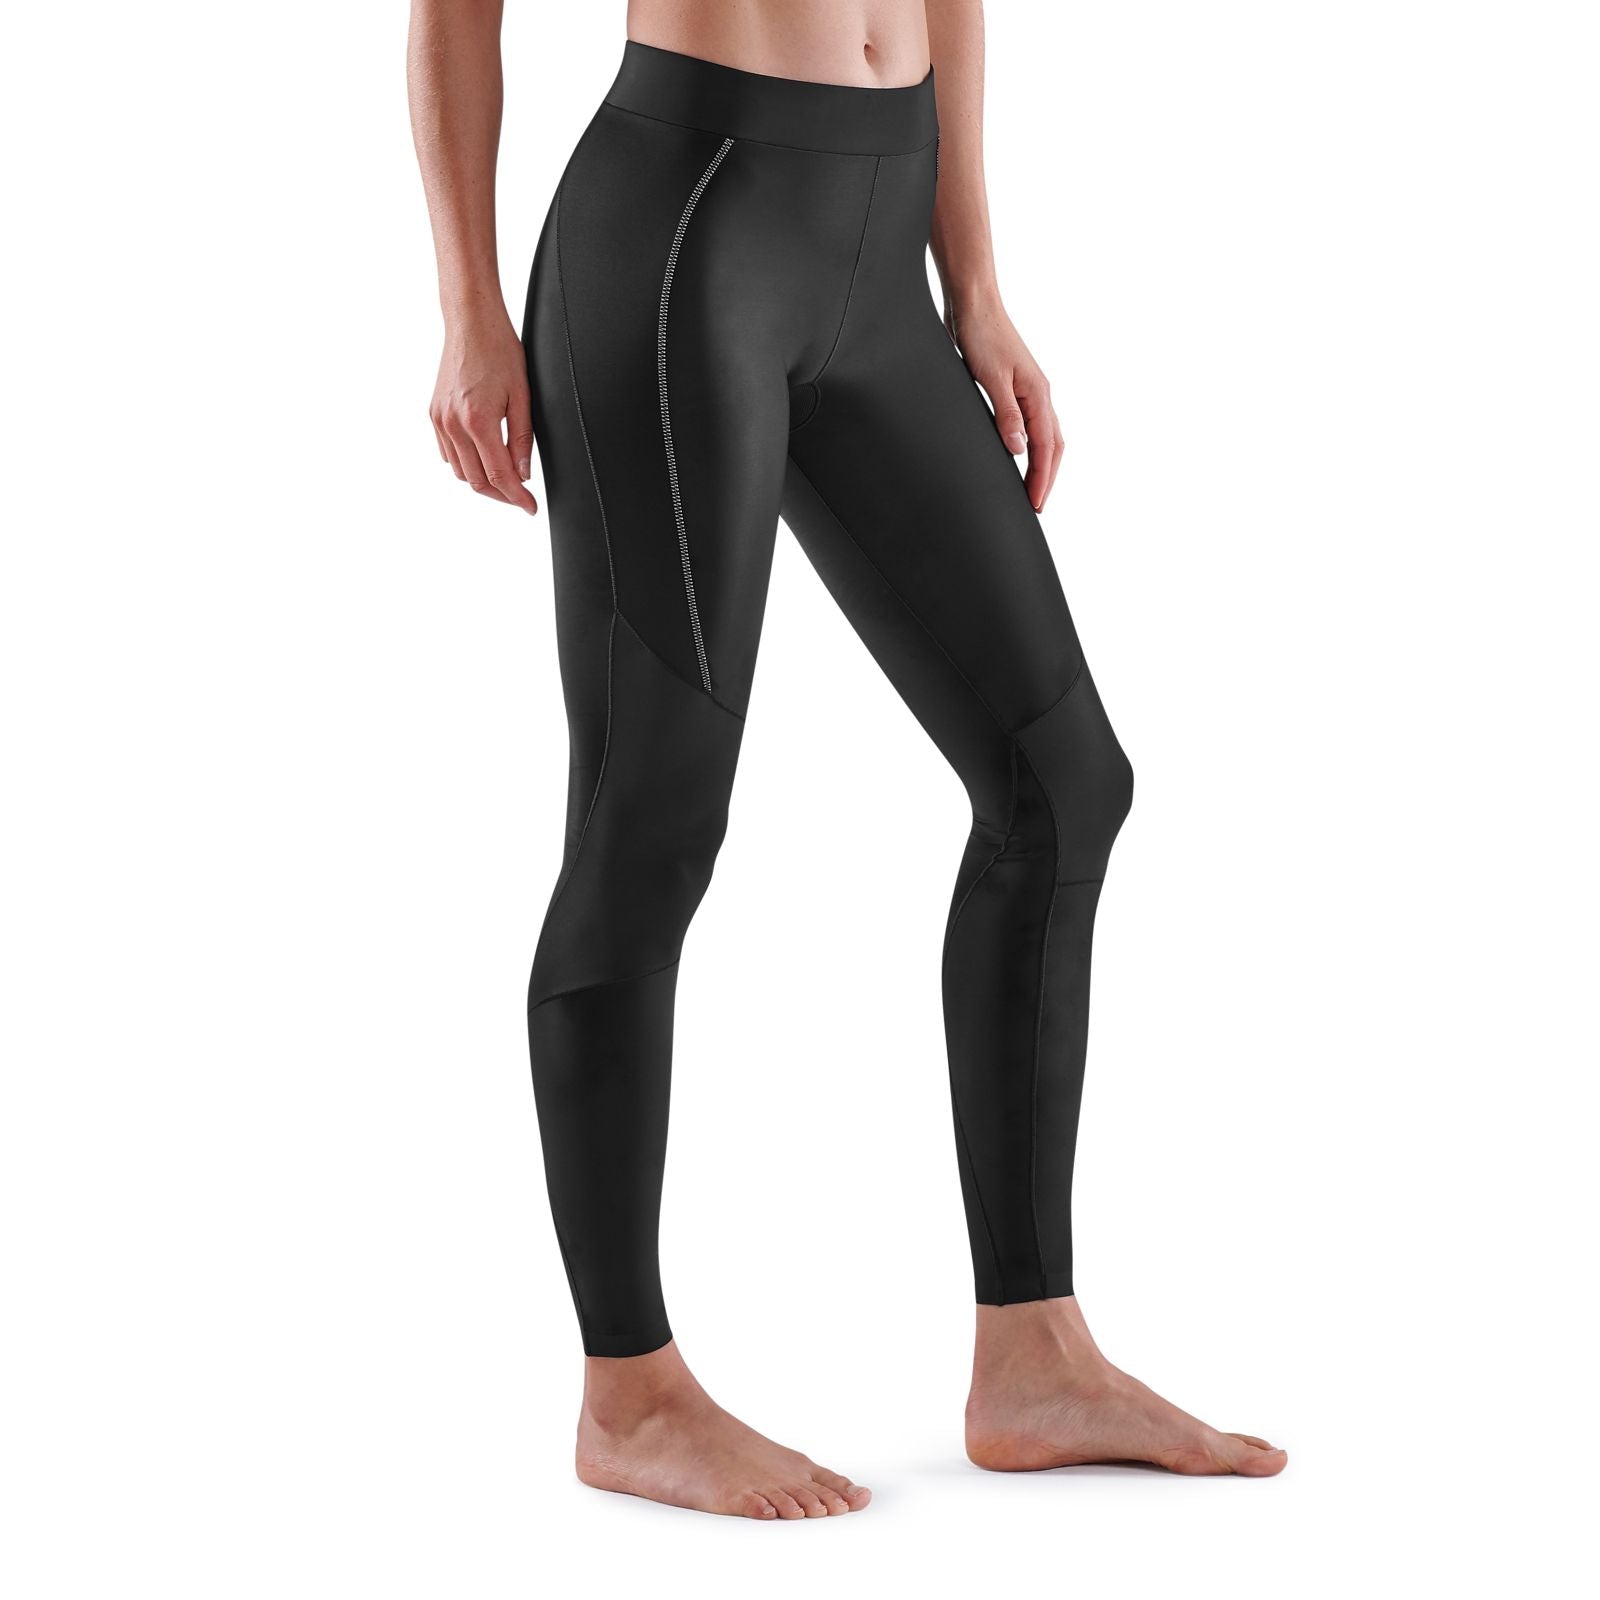 https://www.beactivewear.com.au/cdn/shop/products/skinscompression-compression-tights-copy-of-skins-series-1-women-s-7-8-tights-sky-blue-36633766658217_1600x1600.jpg?v=1659094062